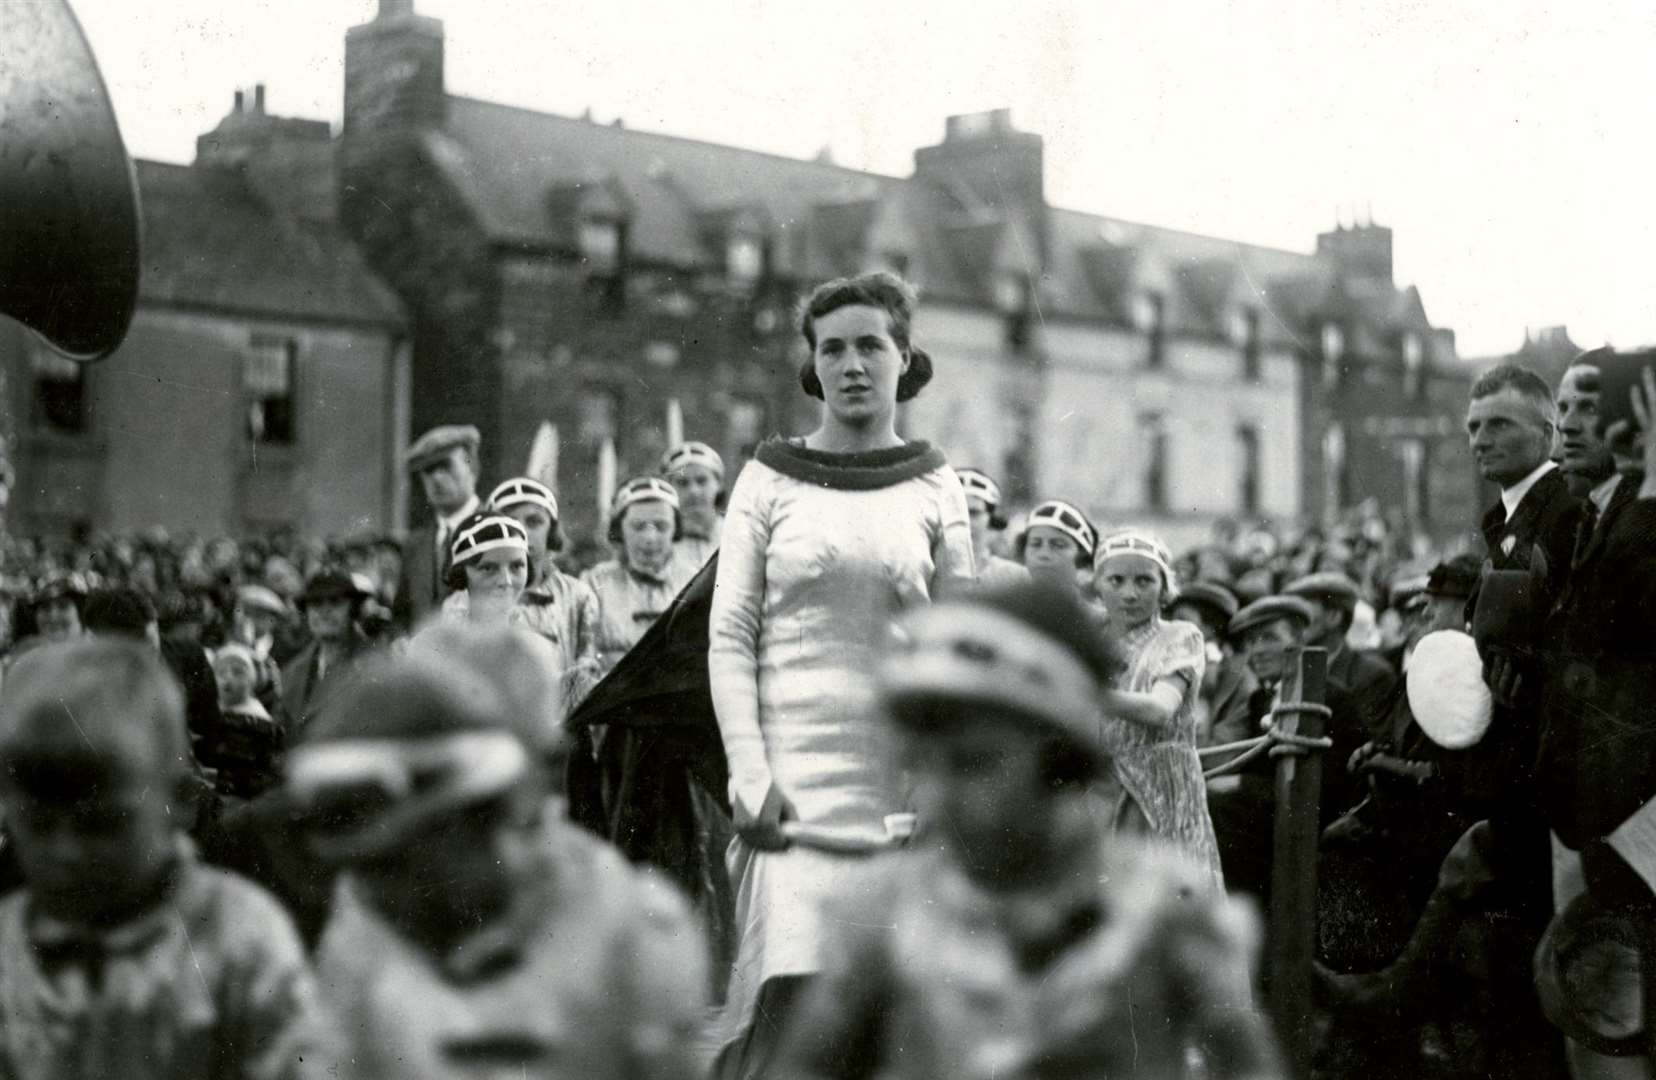 Wick herring queen Retta Shearer arriving for the crowning ceremony in 1937 – from one of the Caithness photo books that will be on sale at the old herring mart each Saturday in August.